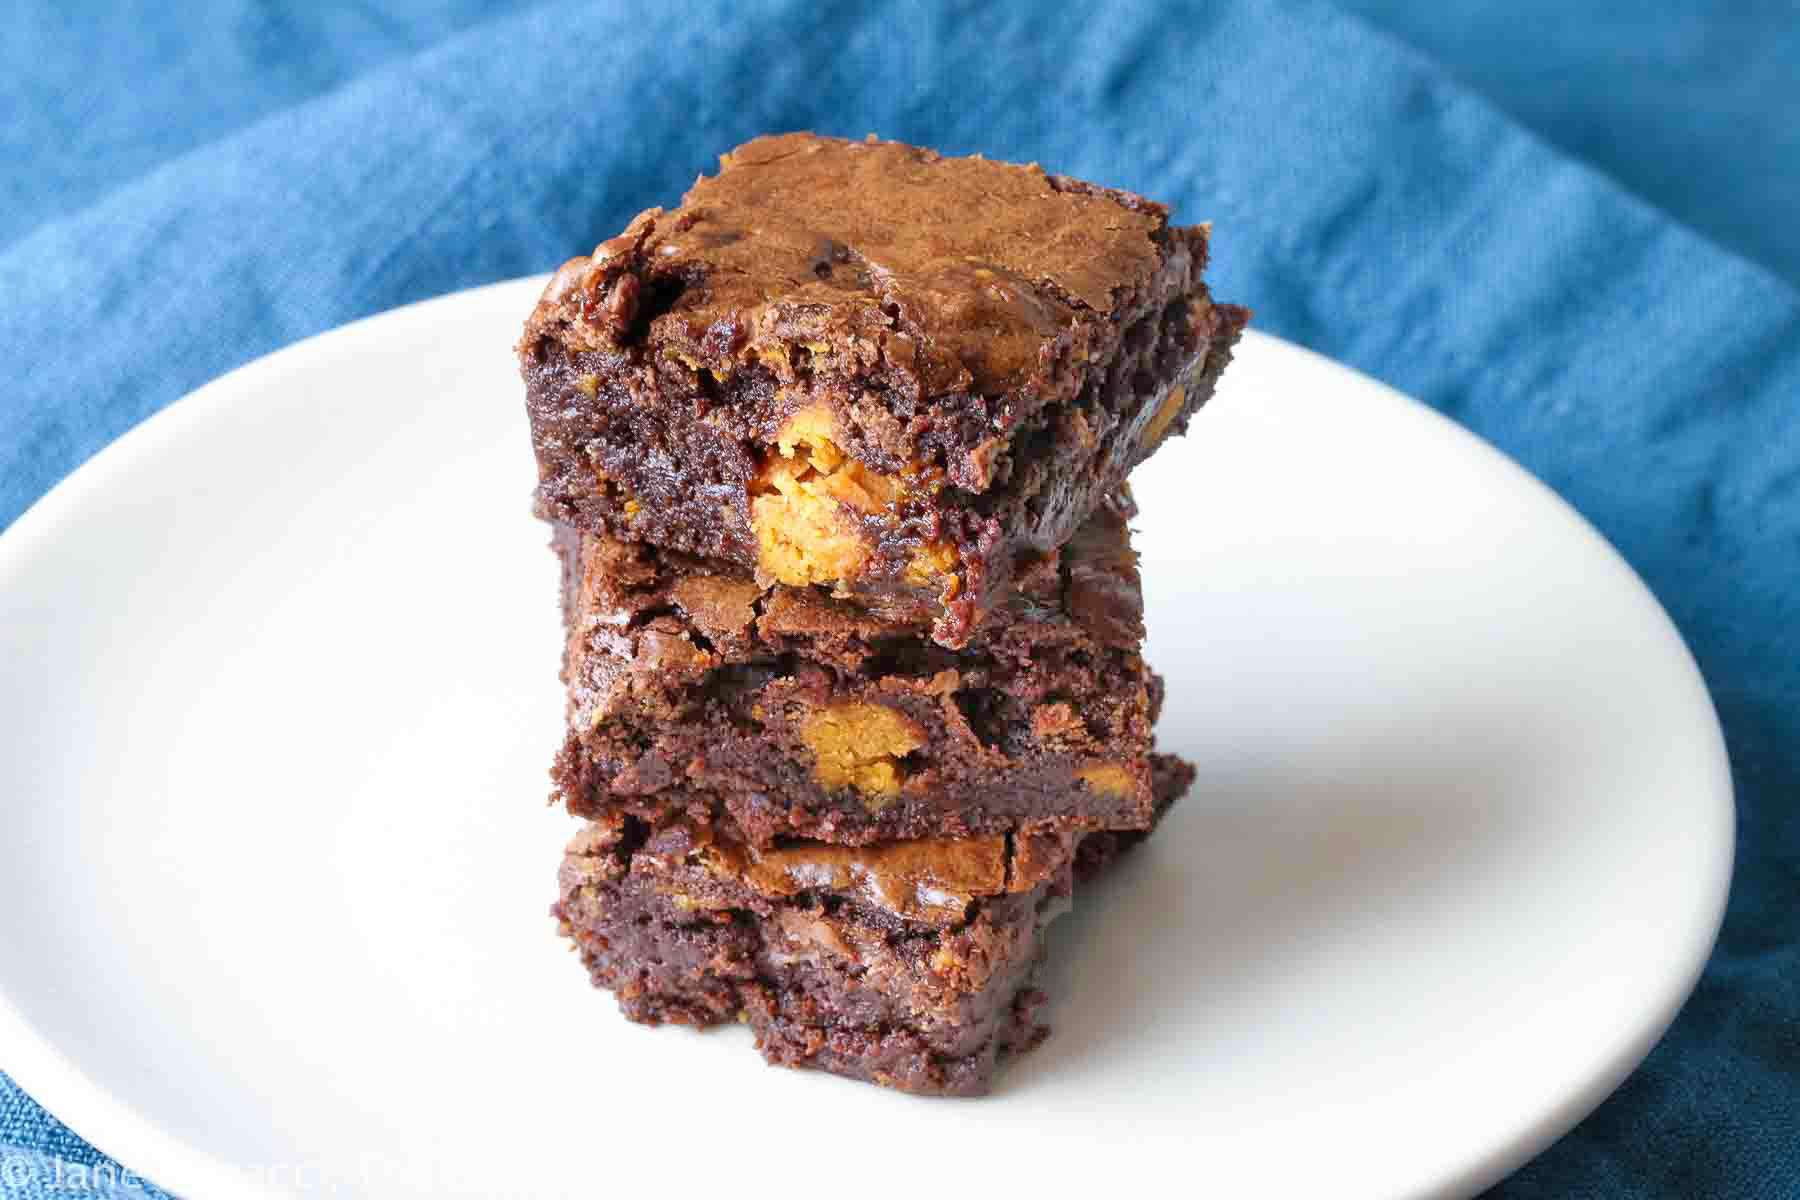 Butterfinger Brownies stacked on white plate with teal napkin background, one with a hand reaching for a brownie off the stack © 2023 Jane Bonacci, The Heritage Cook.